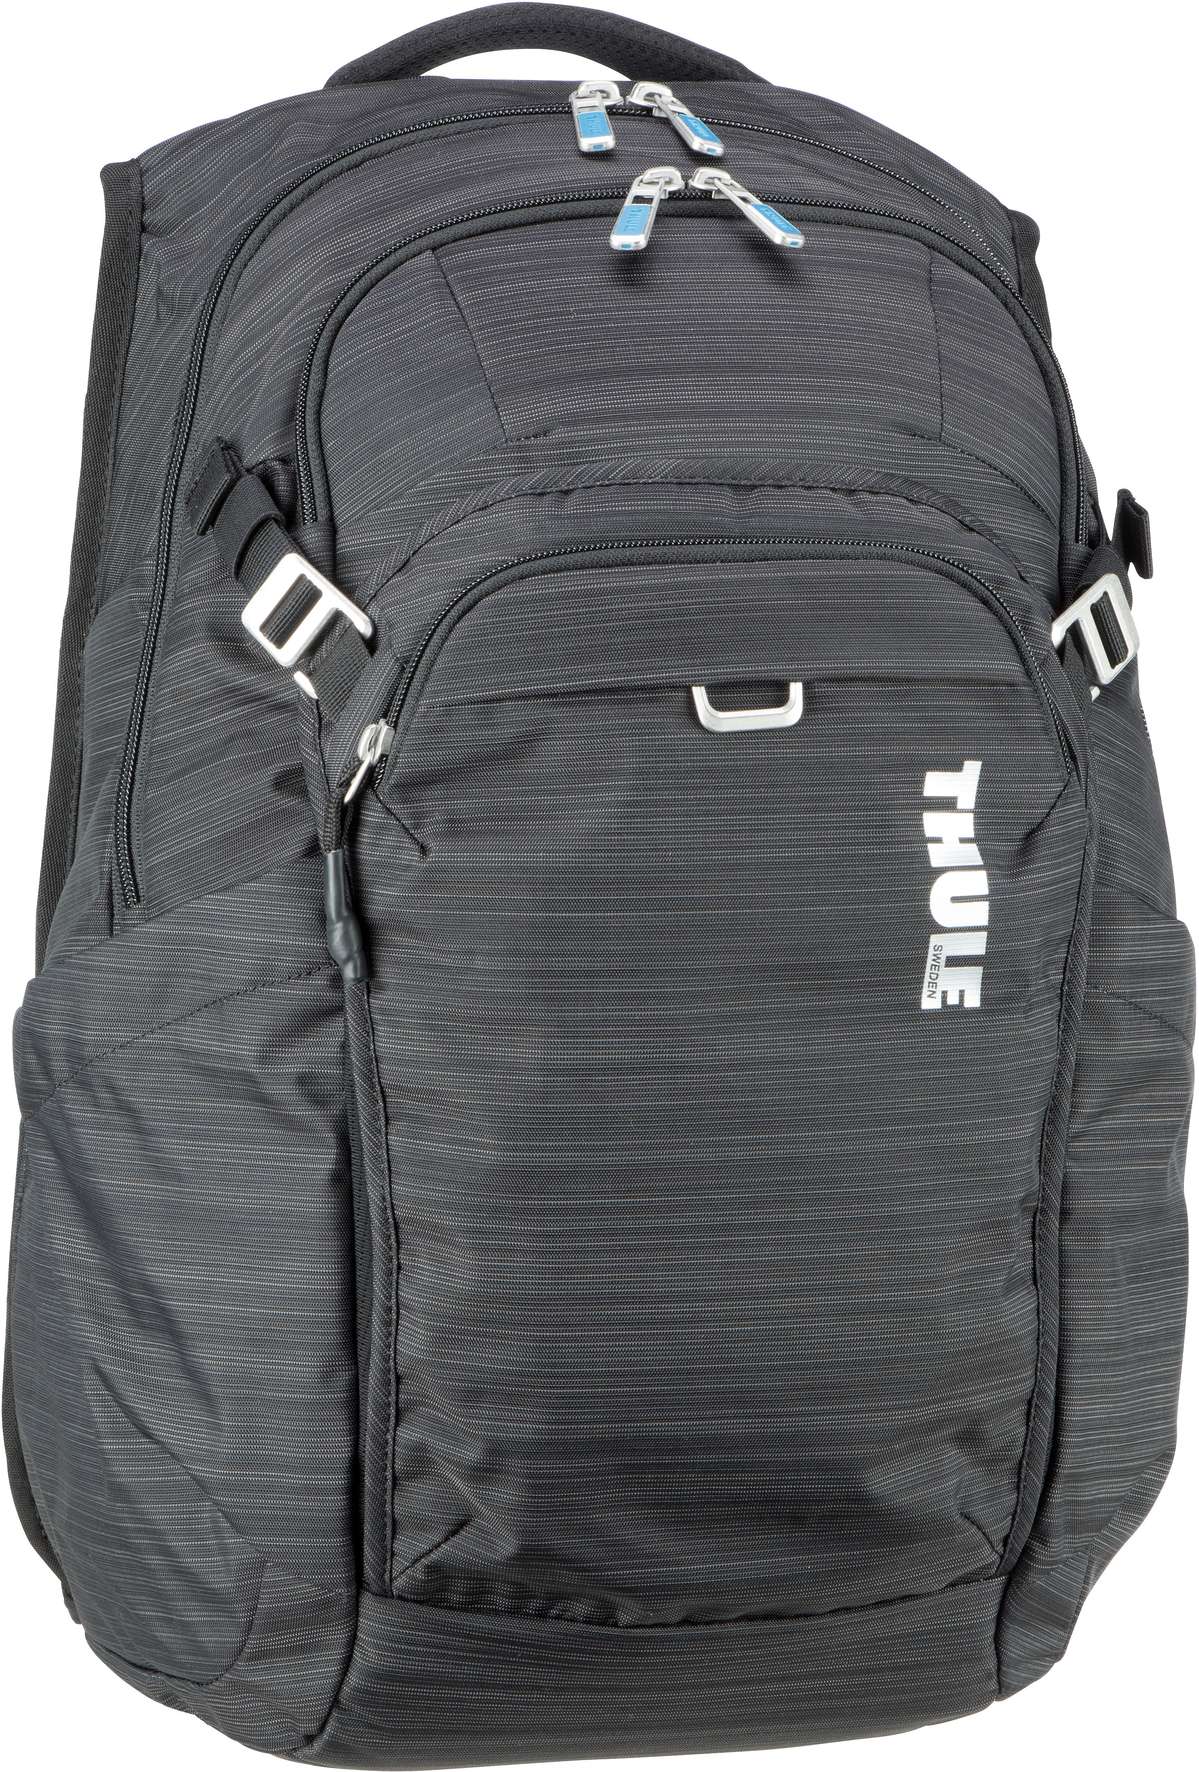 Thule Construct Backpack 24L - Black